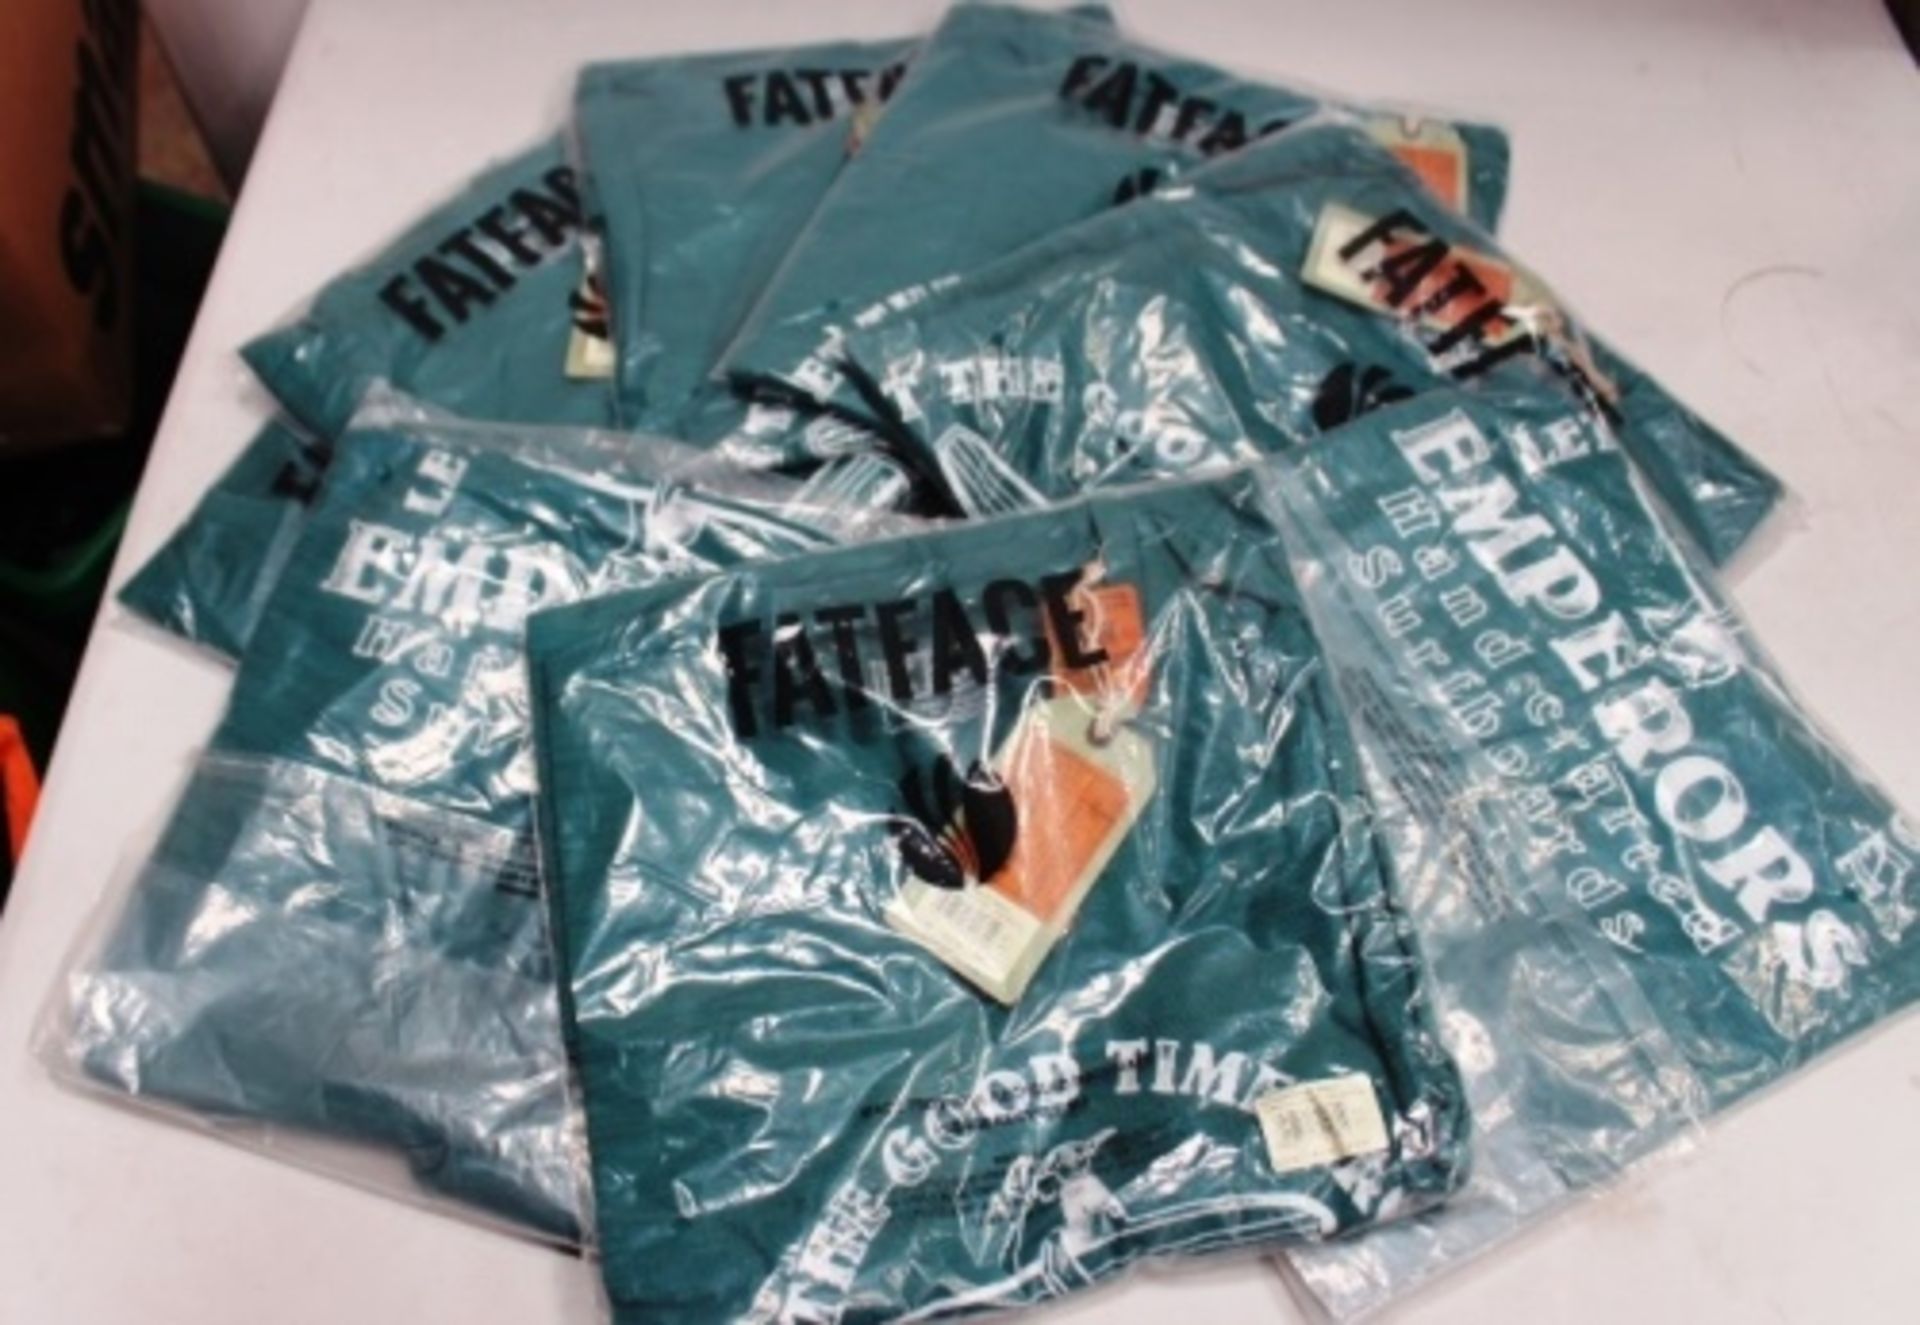 8 x Fat Face Emperor Penguin graphic green teal t-shirts, assorted sizes - New with tags (EB4)